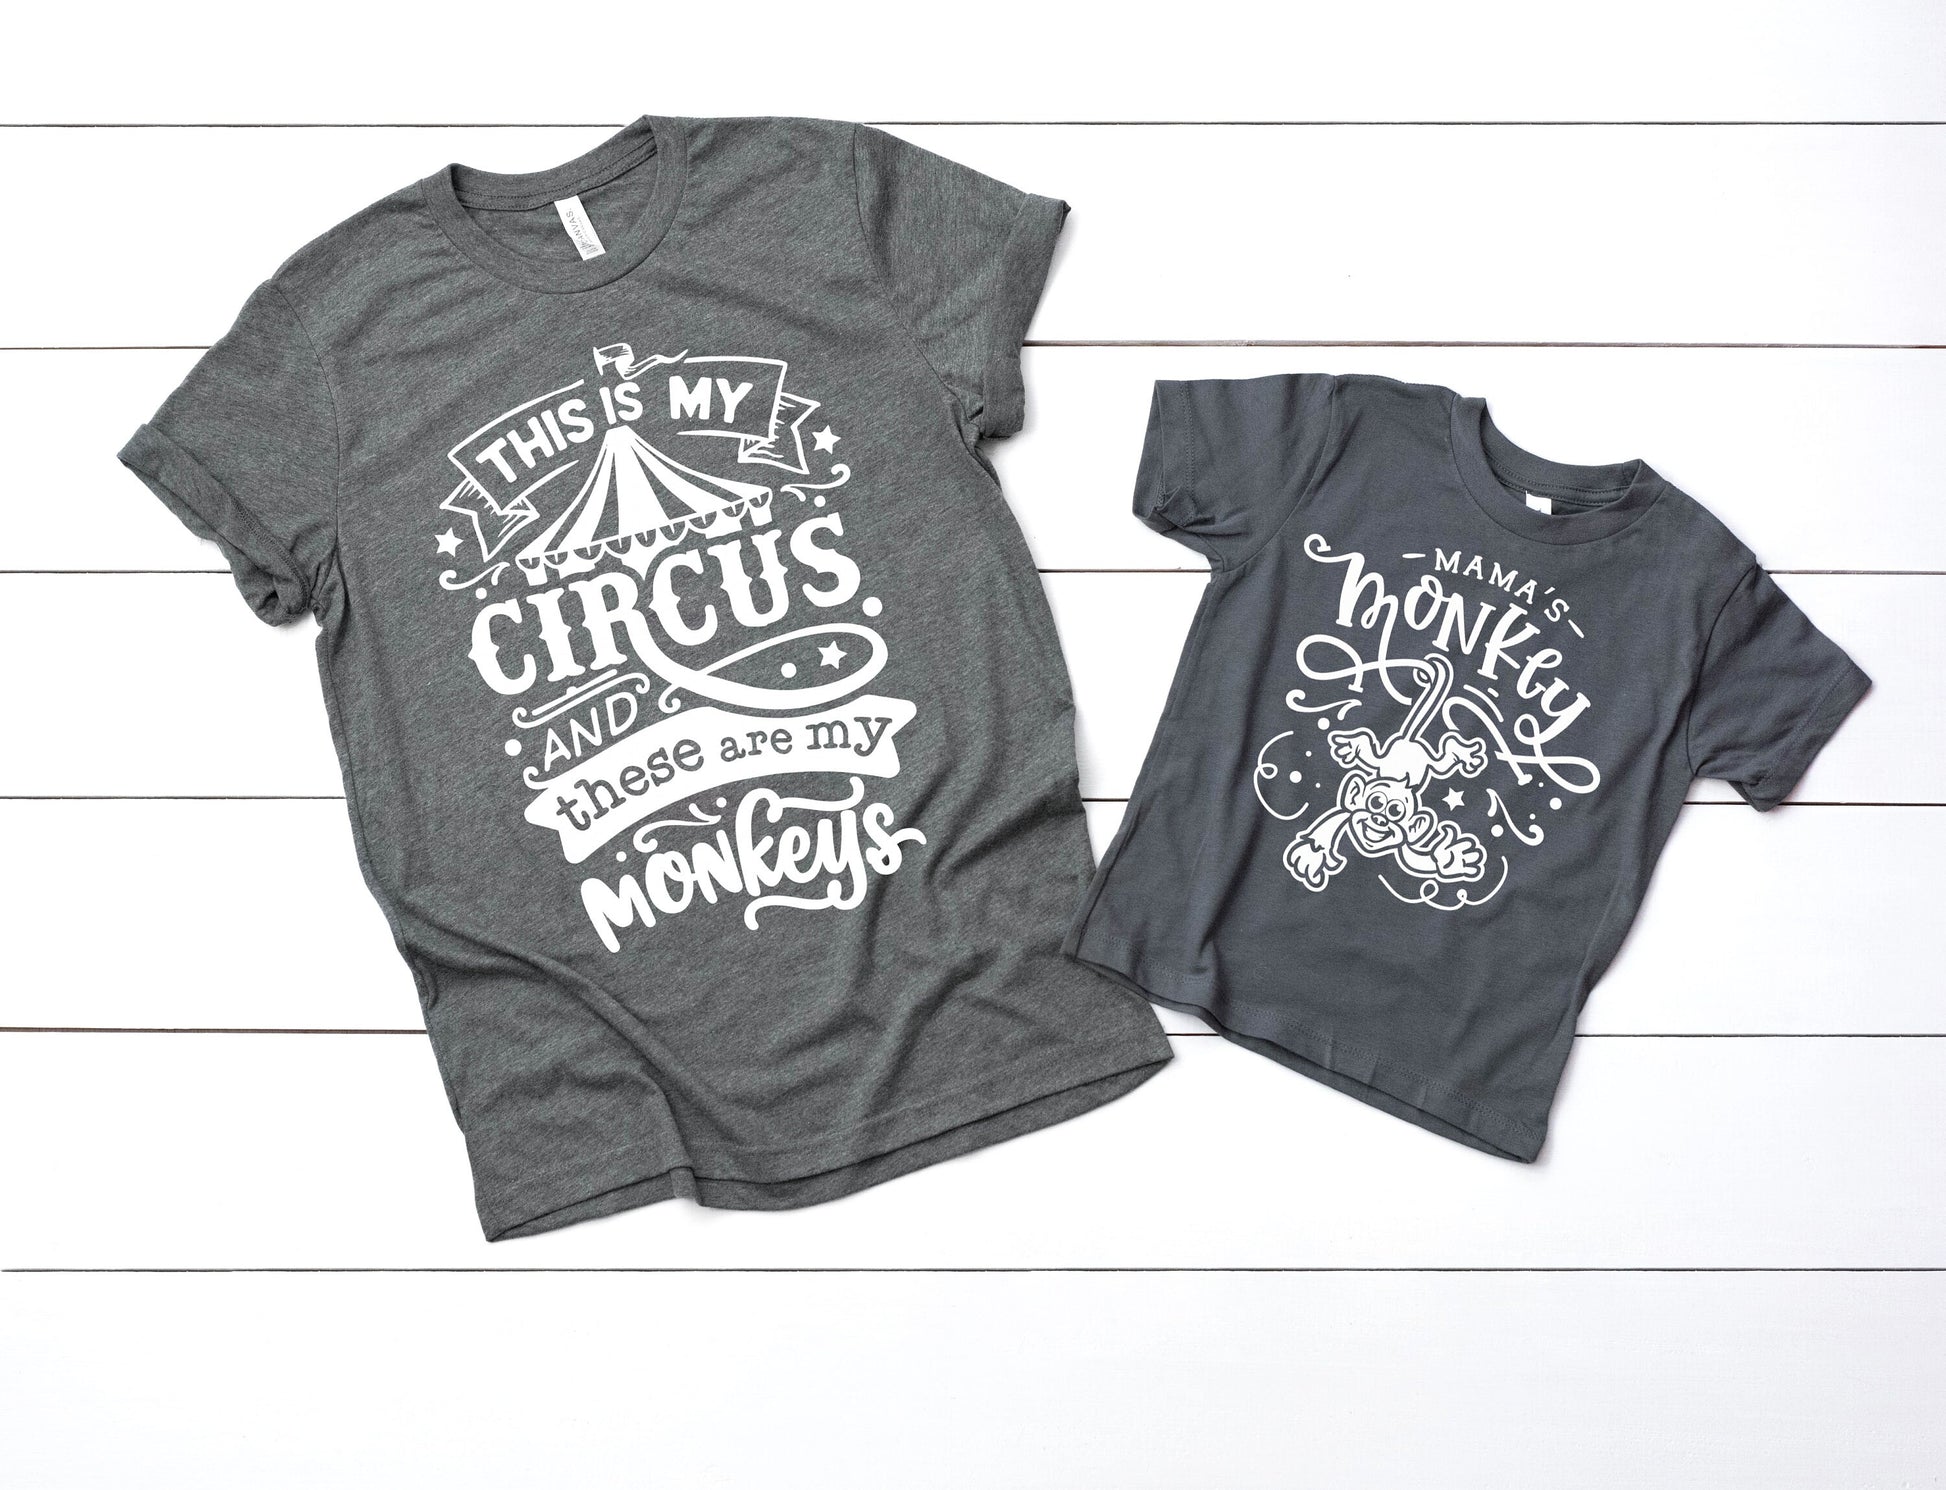 This is My Circus and These are My Monkeys Matching shirts. Circus Birthday Shirts. Circus T-Shirts. Circus Family Shirts. Mommy and Me.